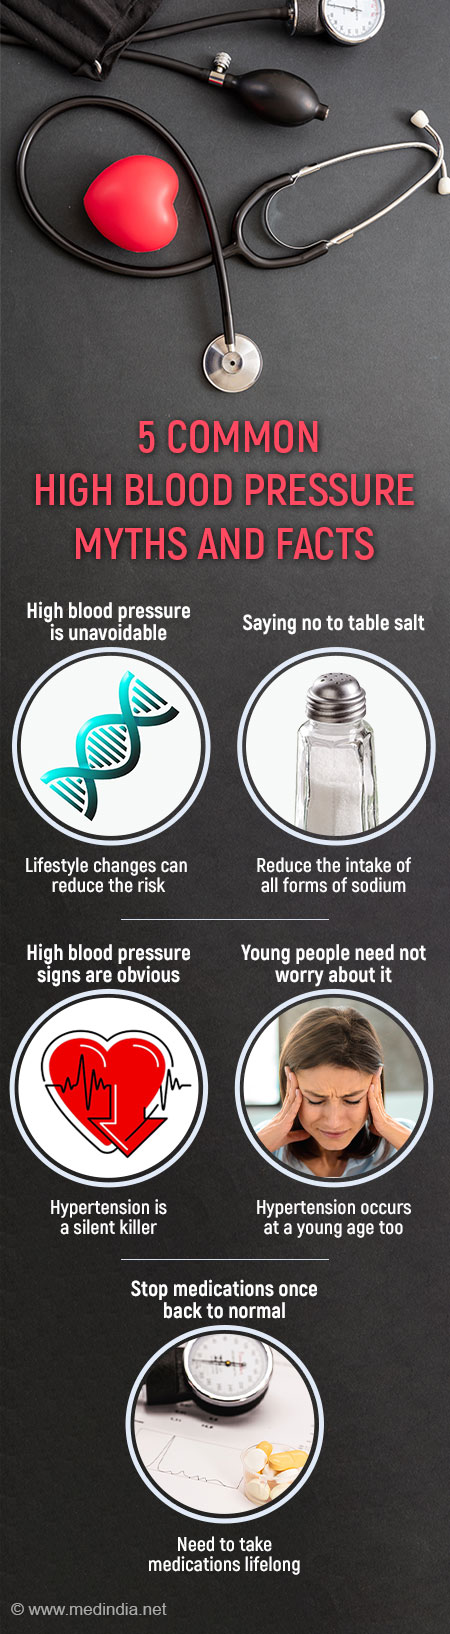 https://images.medindia.net/news/450_237/5-high-blood-pressure-myths-and-facts.jpg